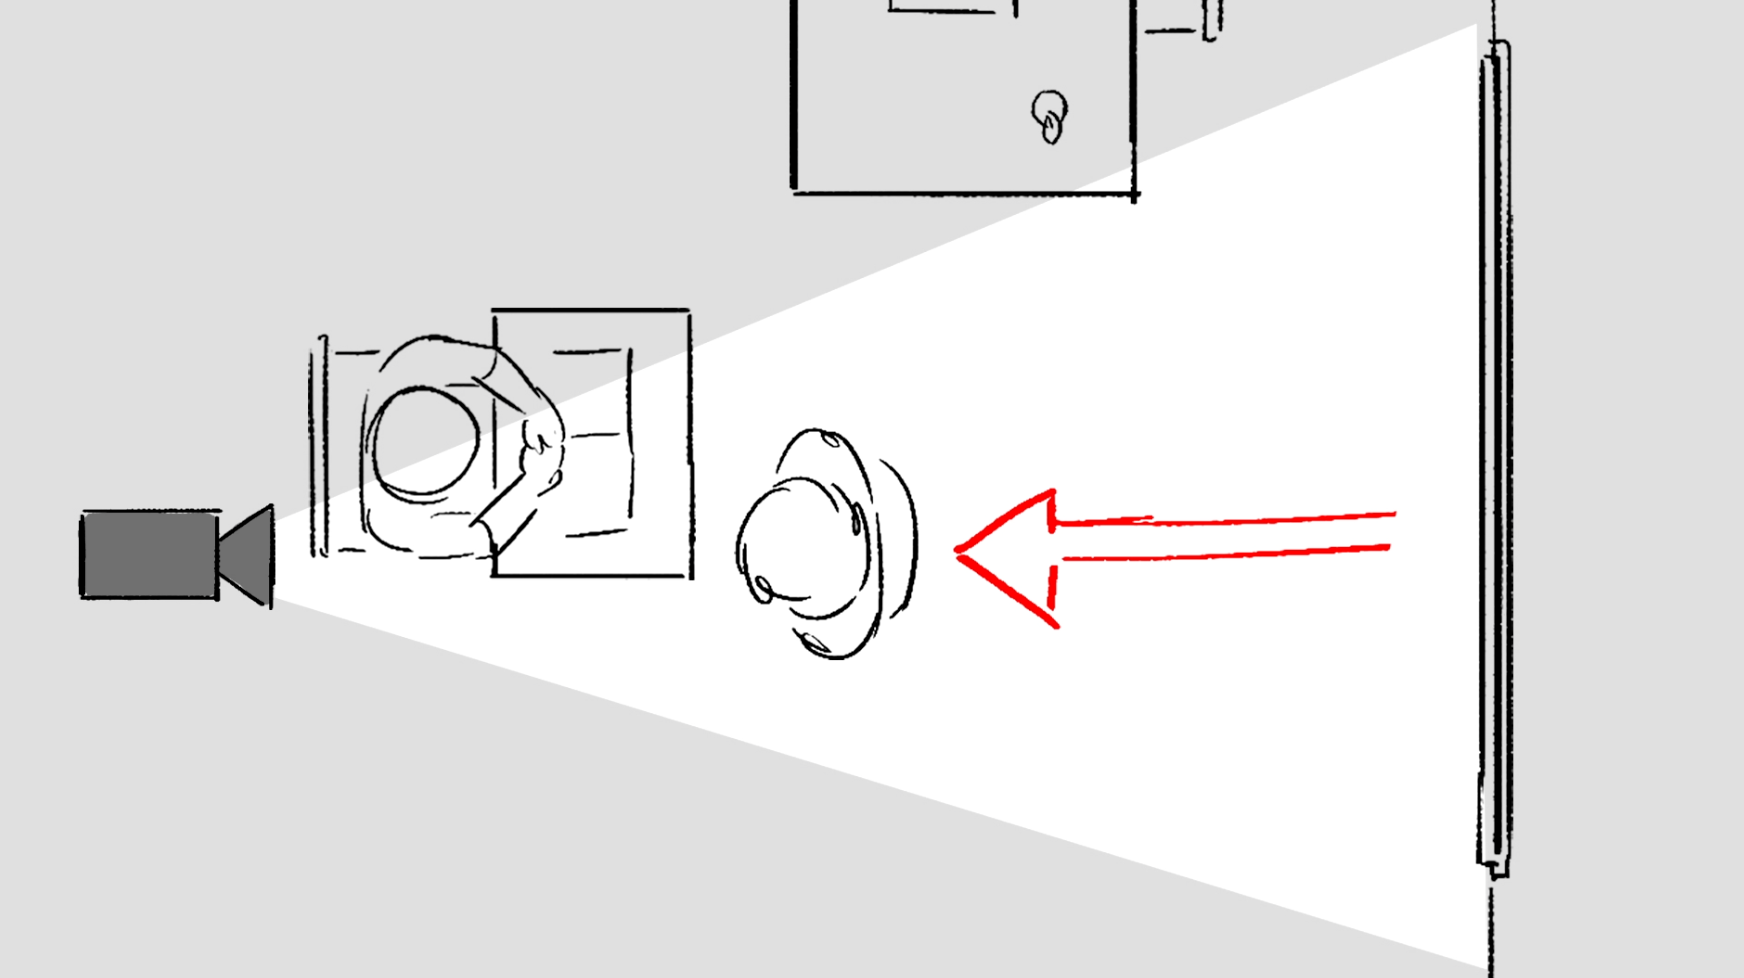 Storyboard image from above showing position of the camera and movement of a character.